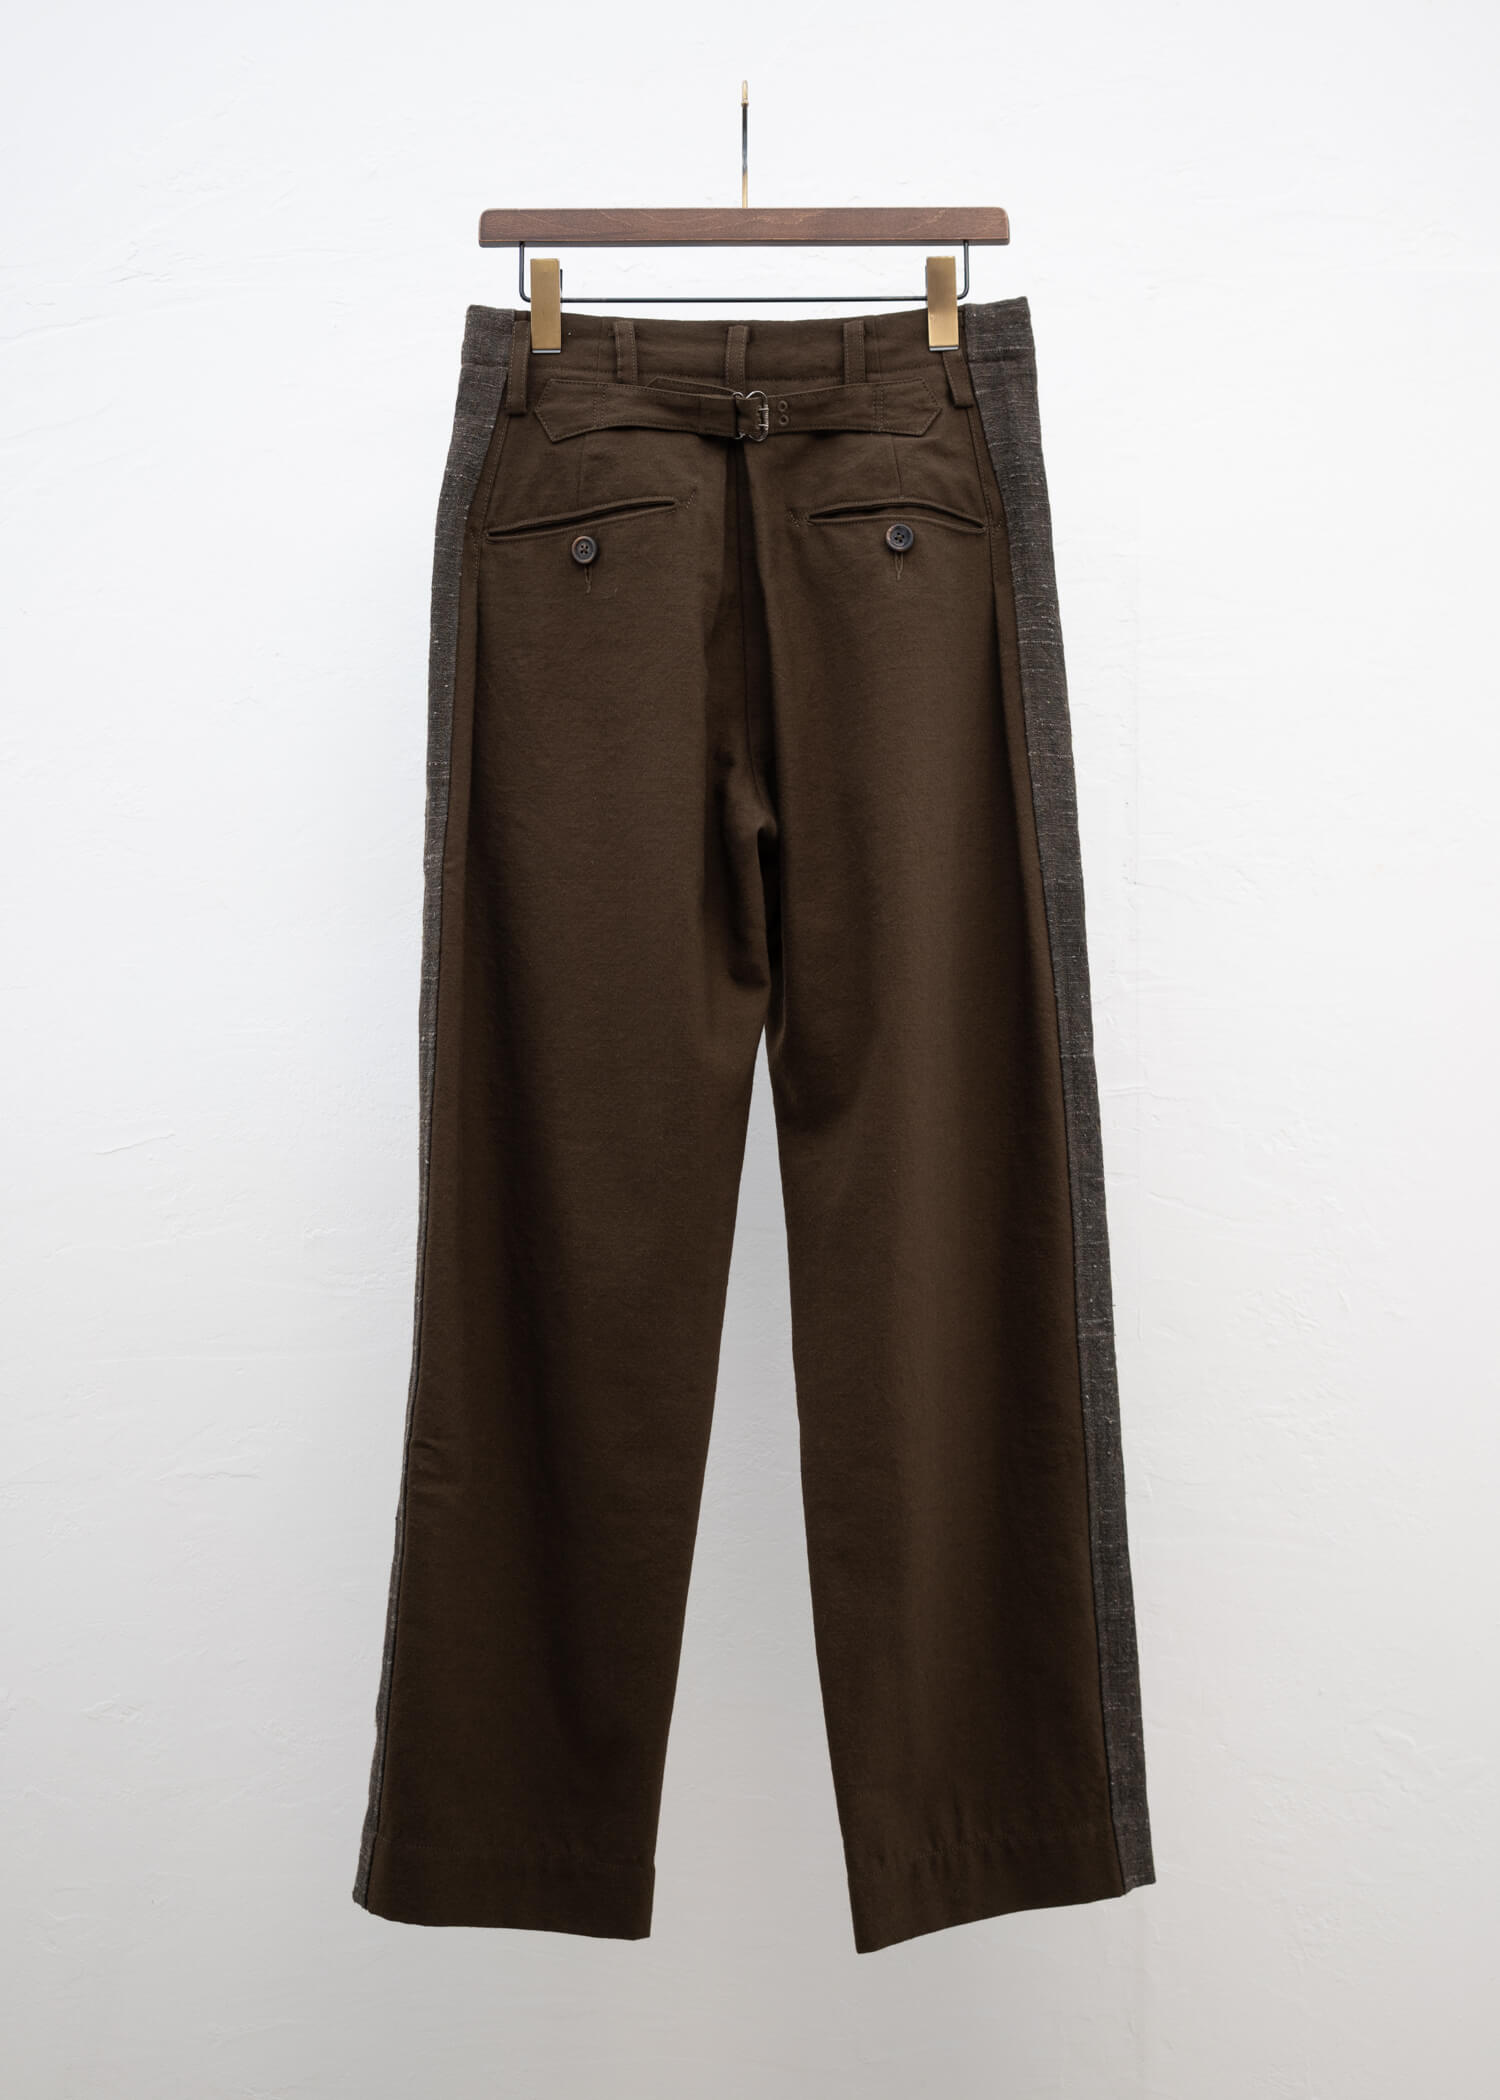 ZIGGY CHEN SIDE TAPED WORKER TROUSERS